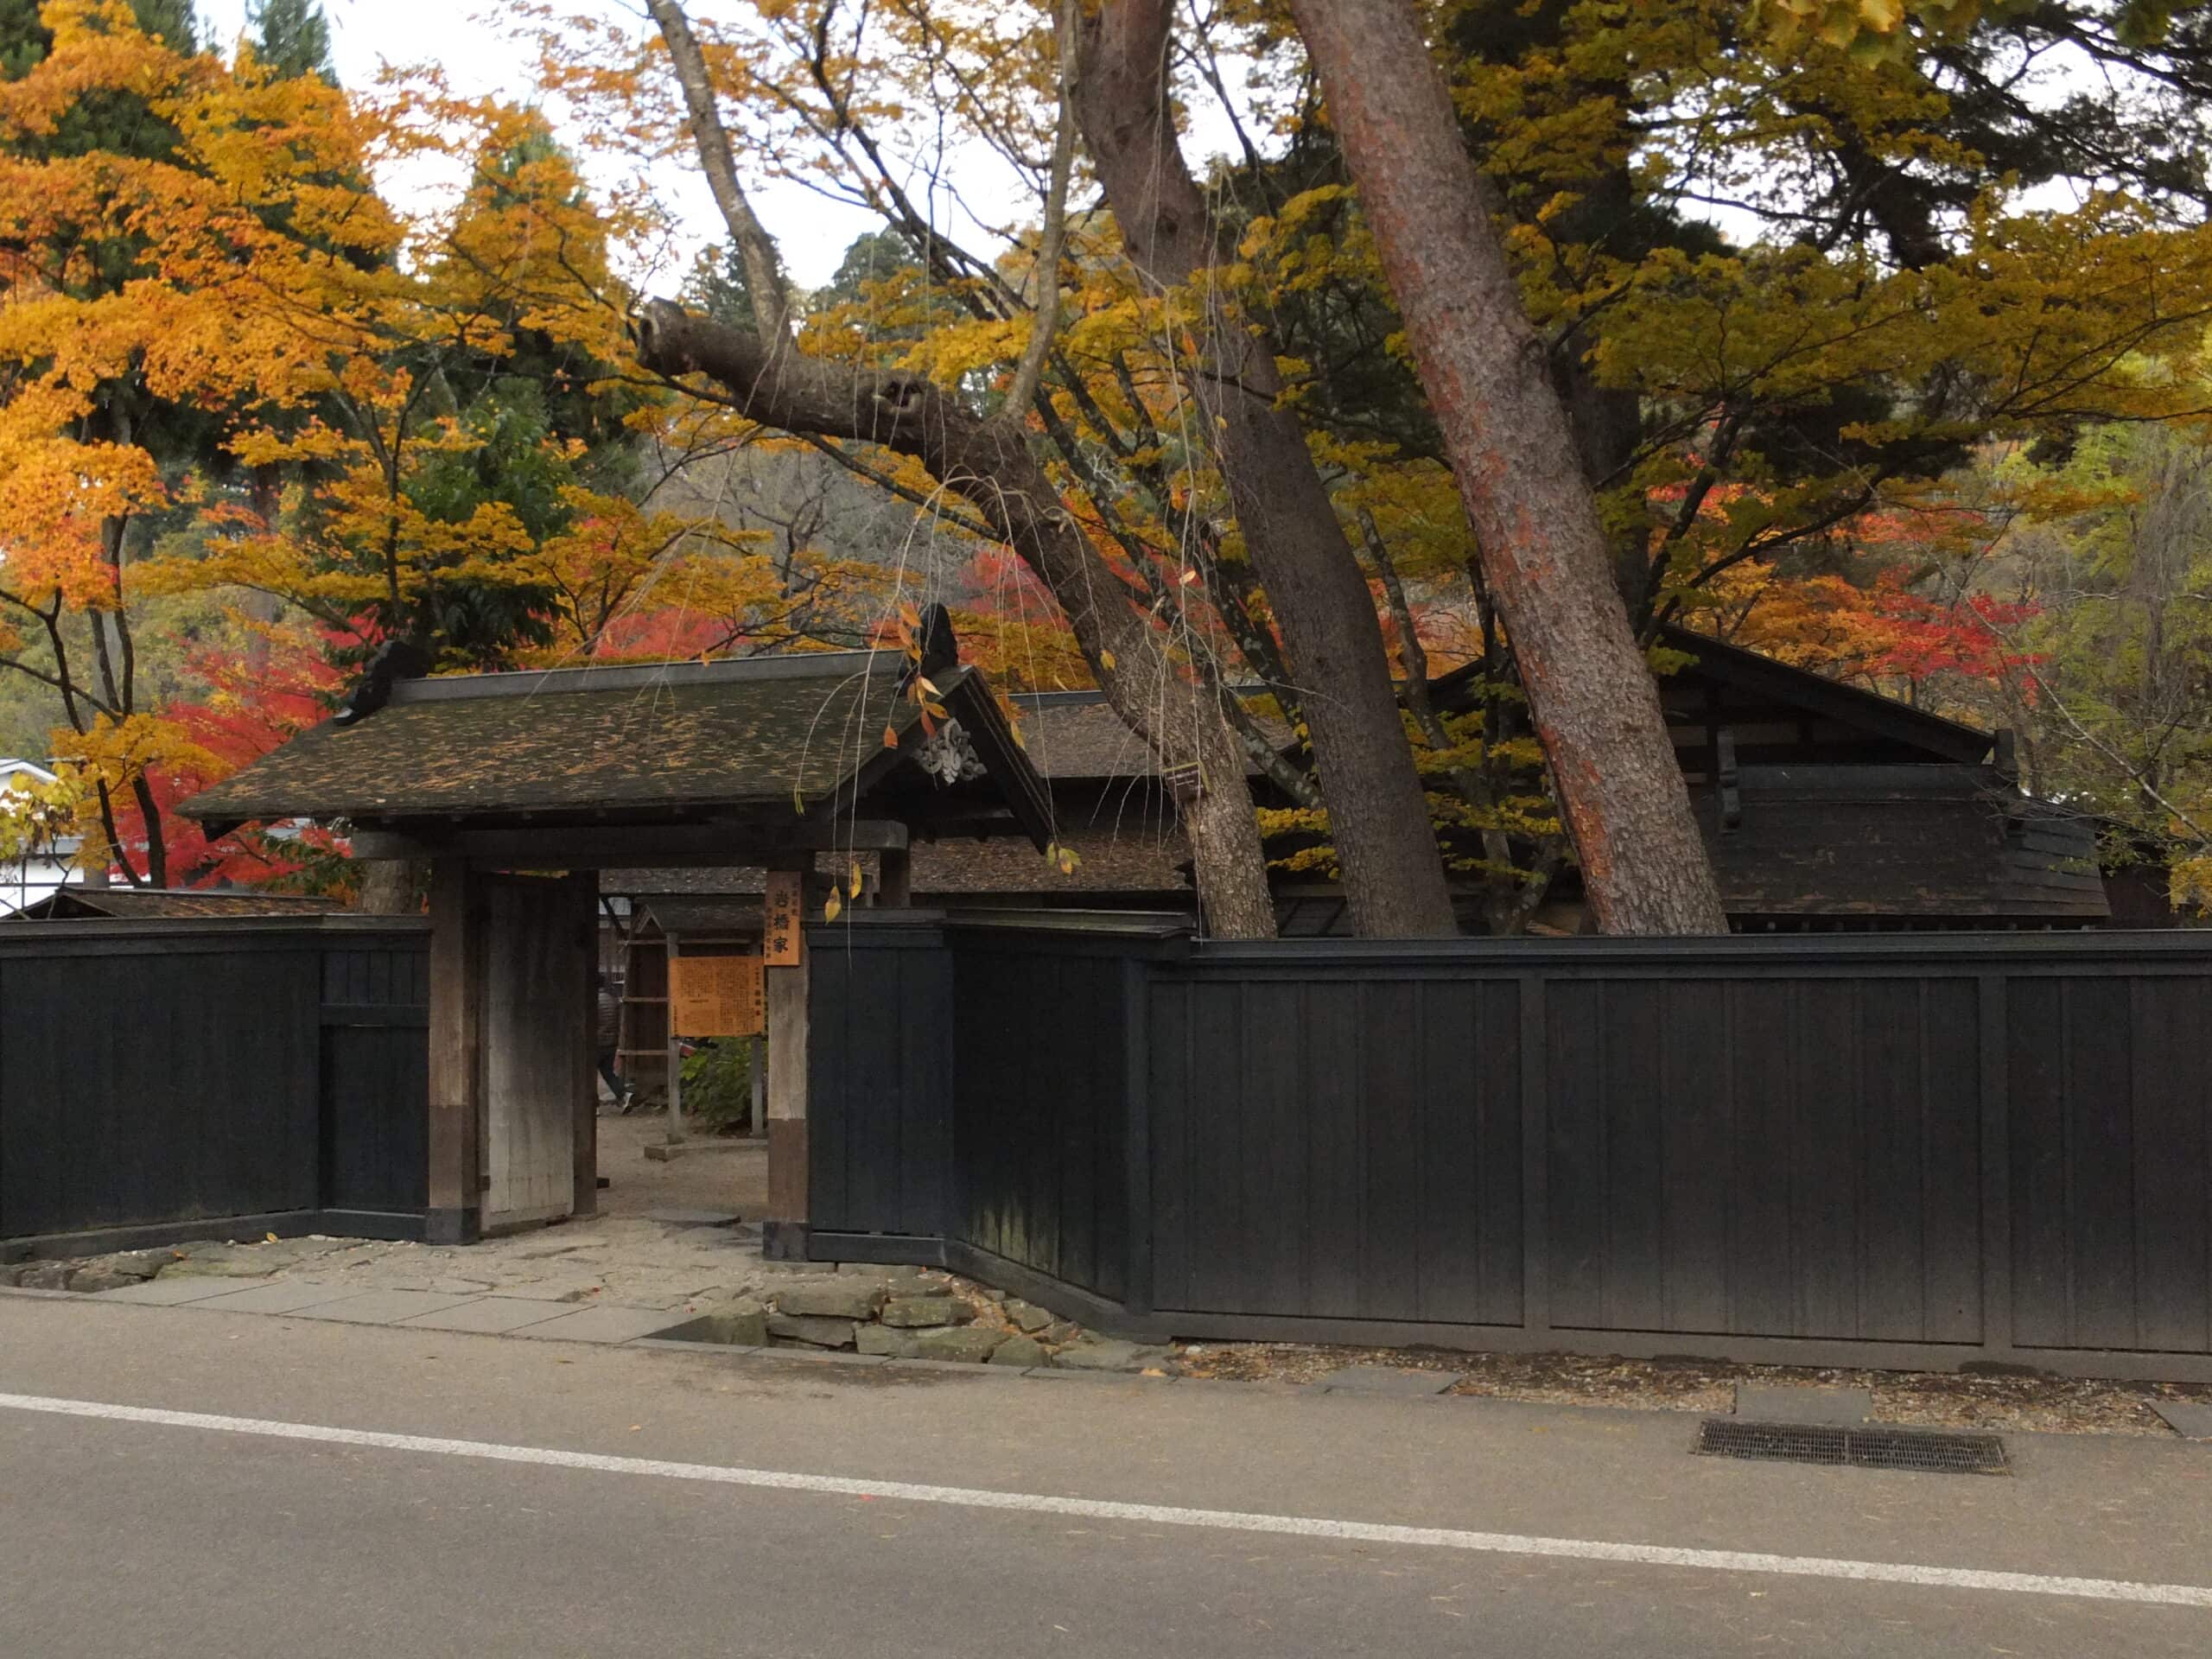 A serene autumn scene featuring a traditional wooden gate and fence in front of a house.